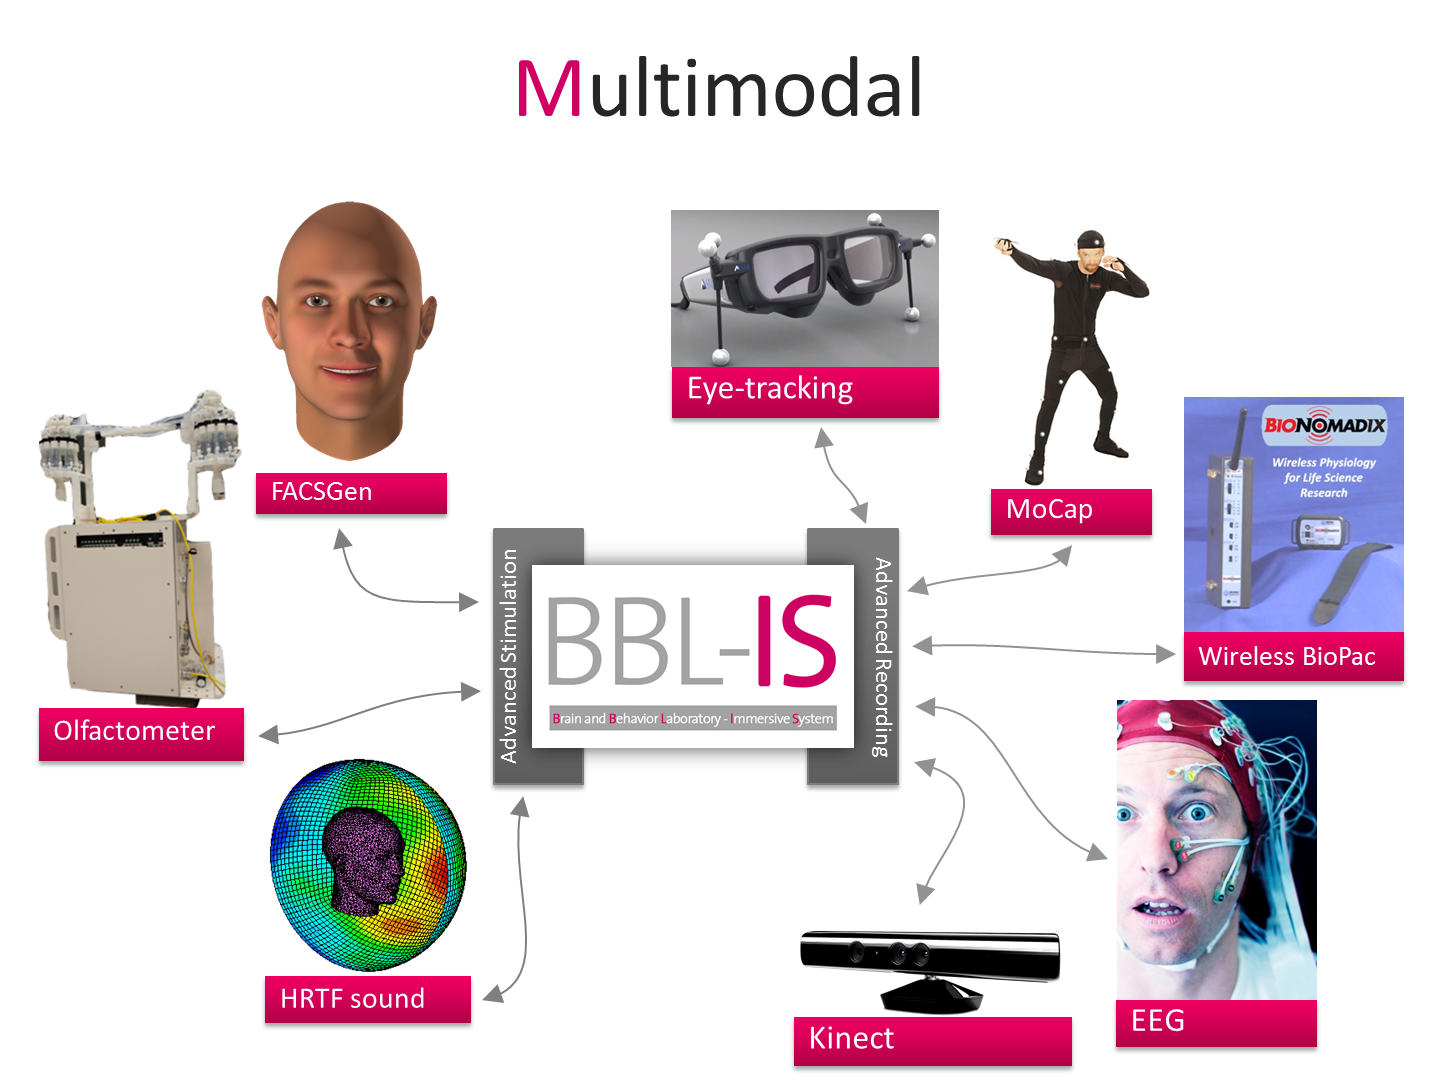 BBL-IS Mulimodal